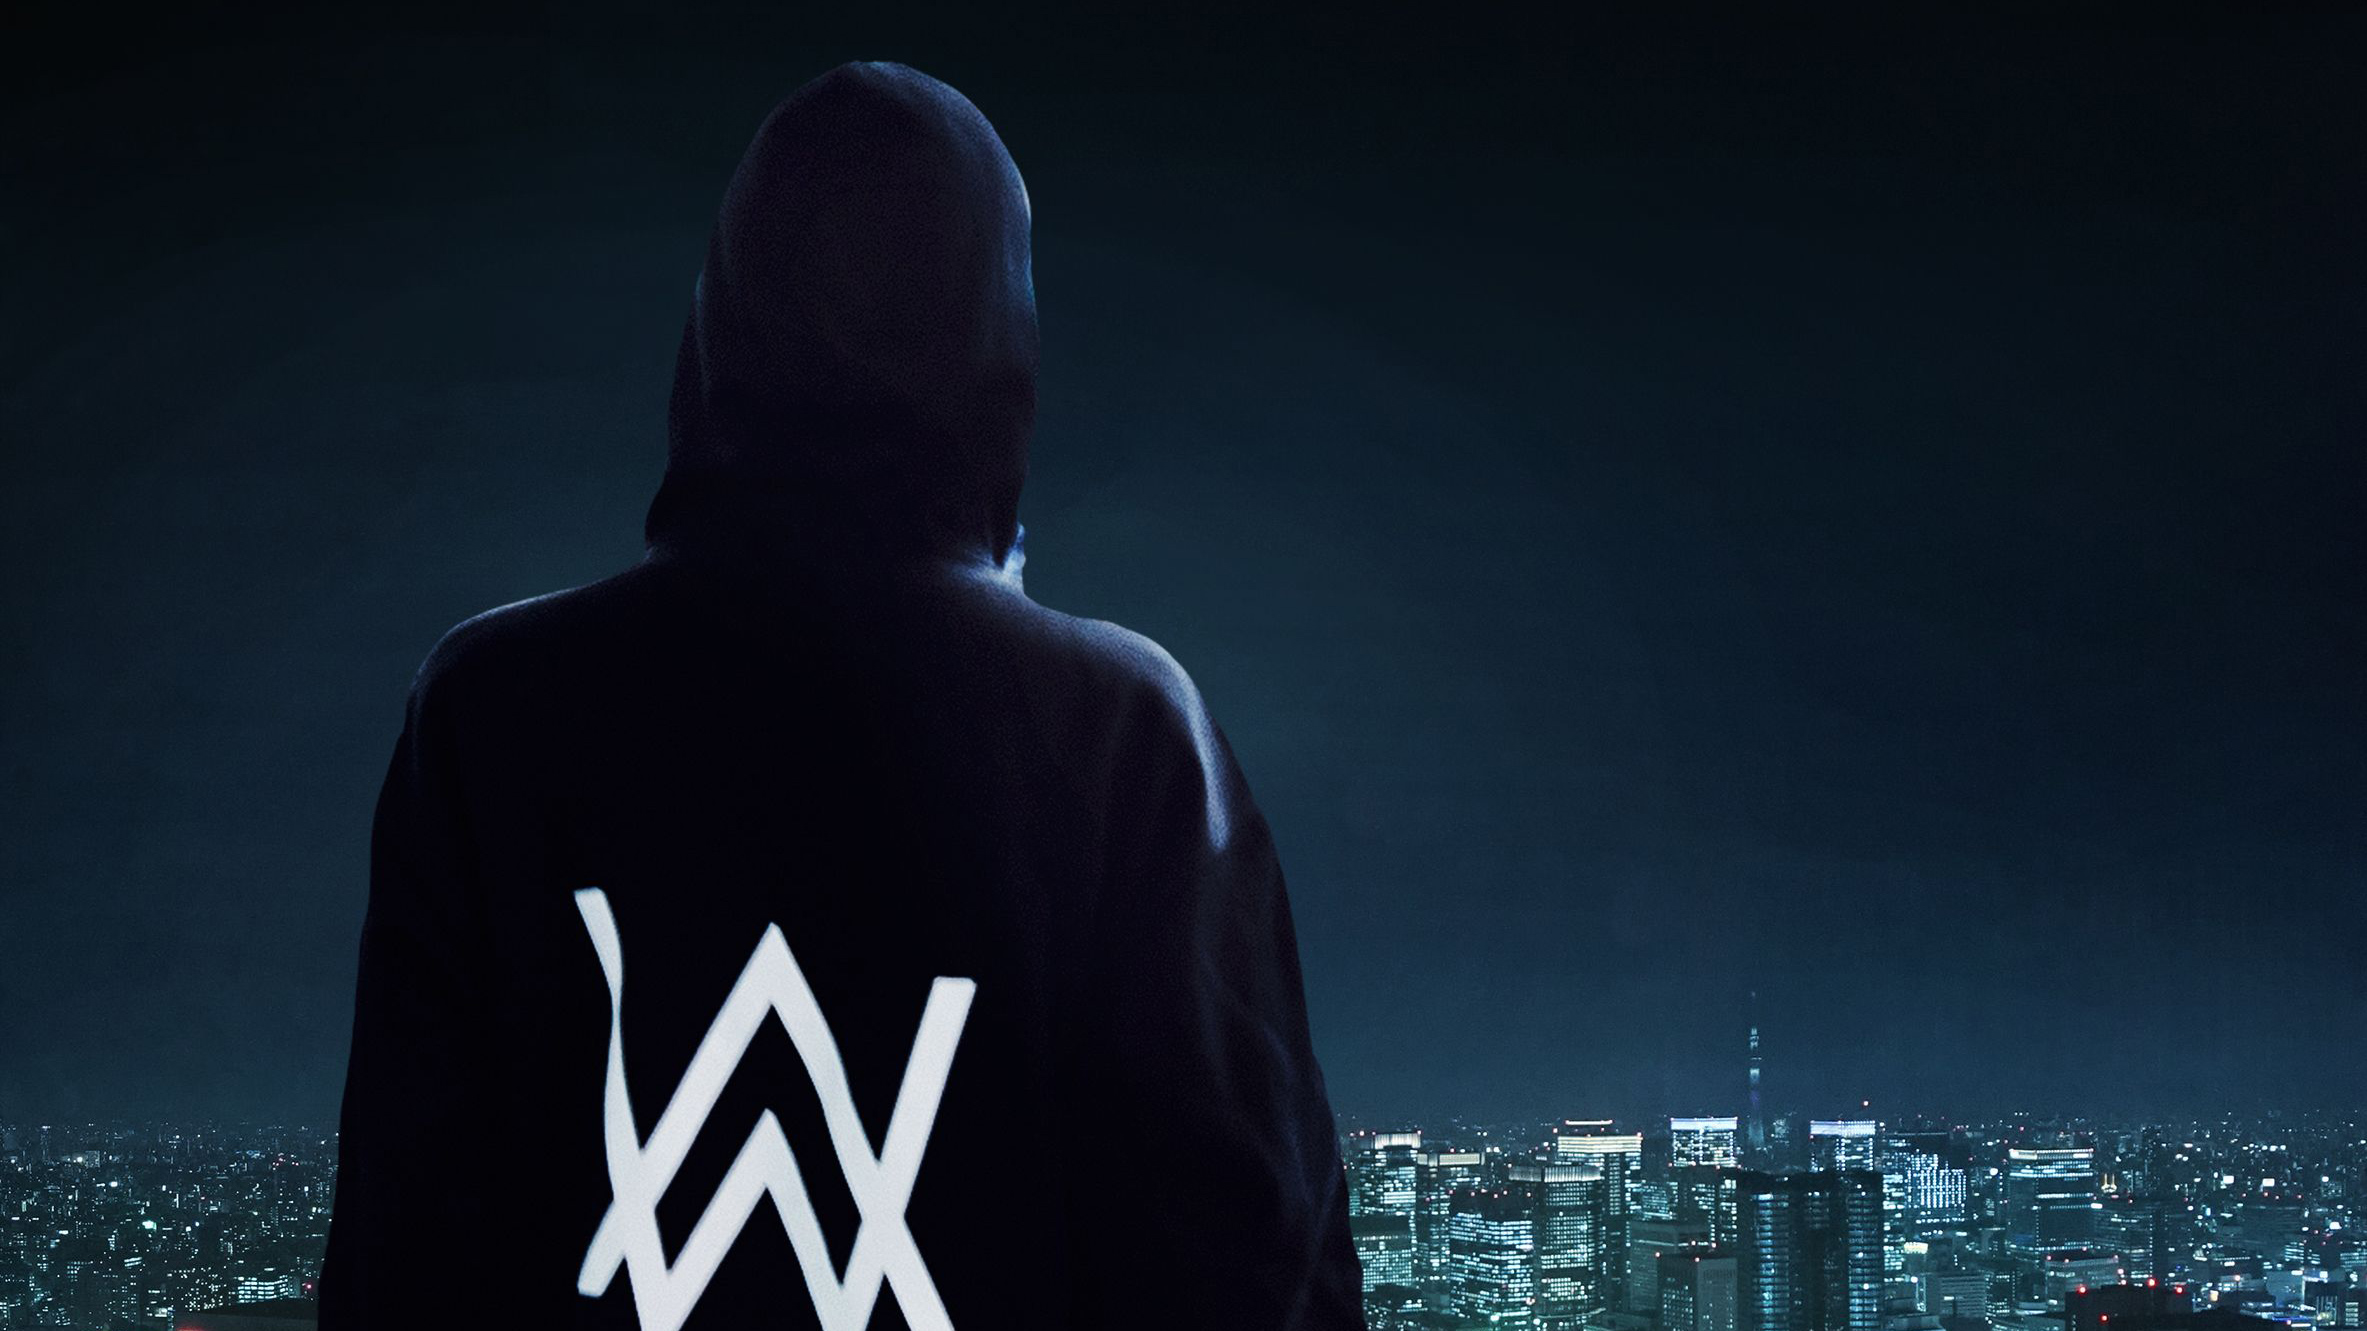 Alan walker standing on edge hd music k wallpapers images backgrounds photos and pictures